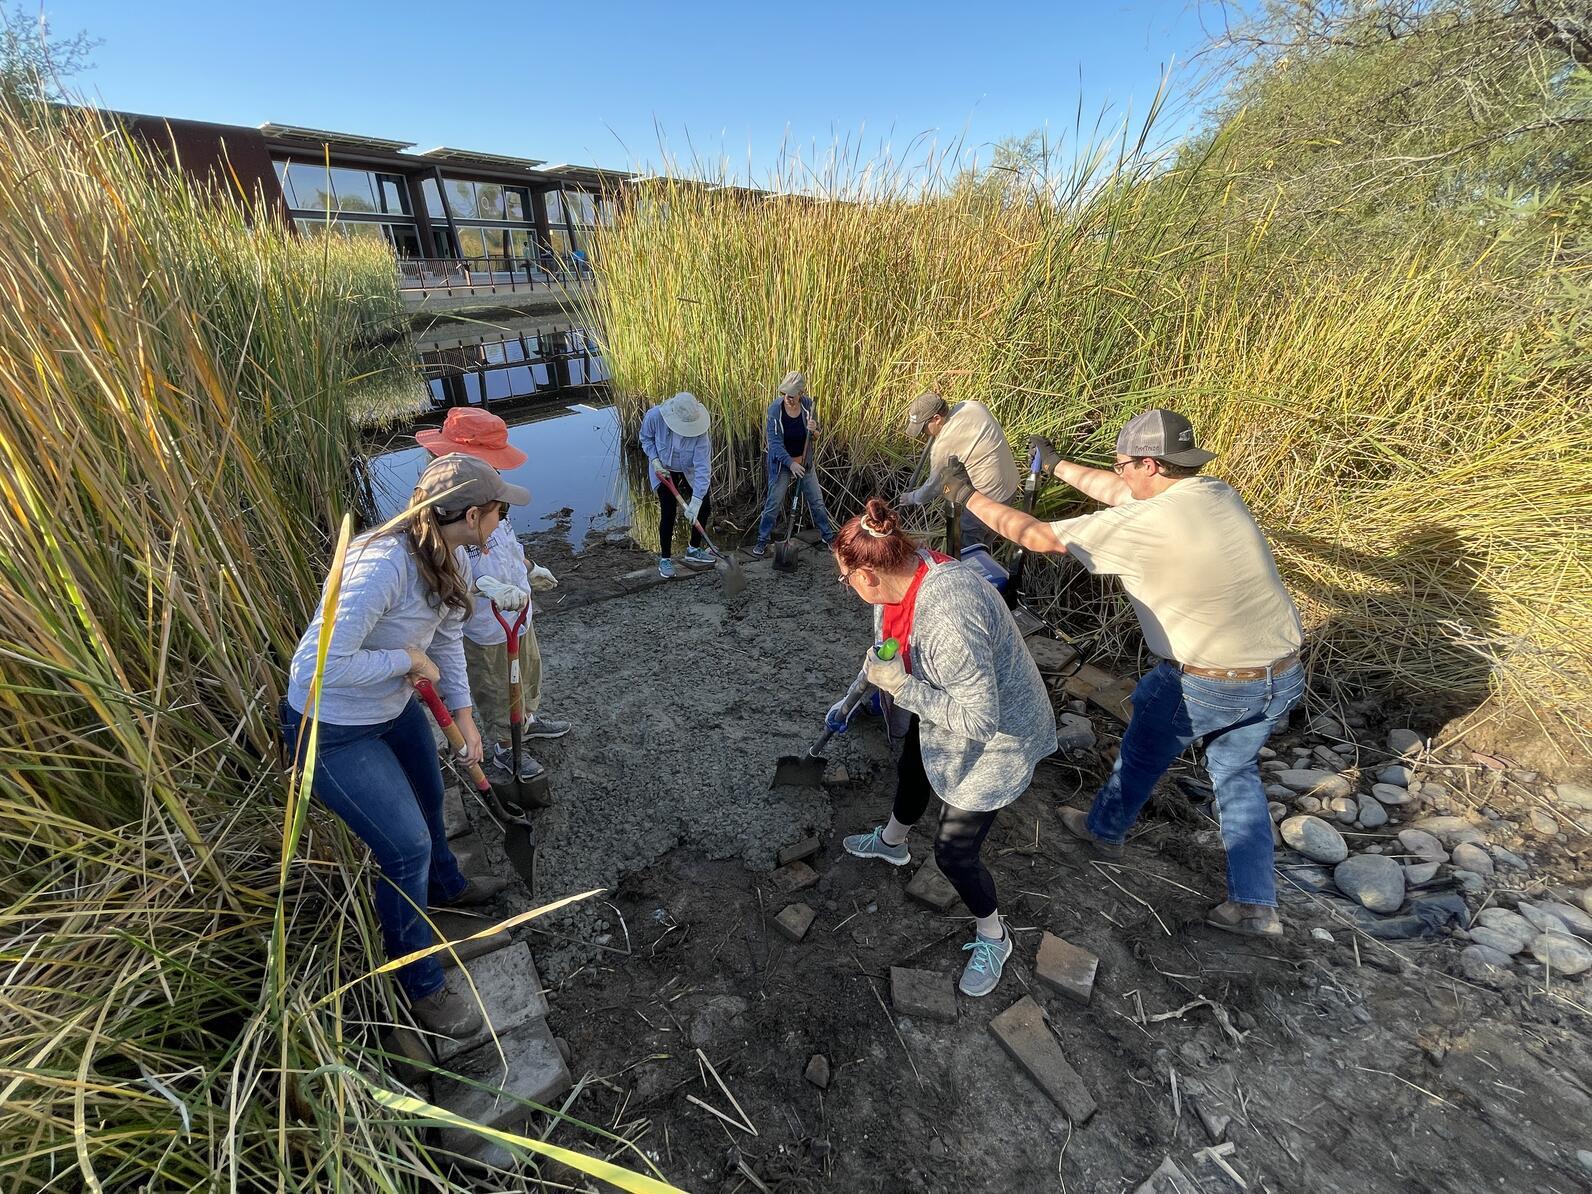 Volunteers work as a team to spread concrete in a recently cleared patch of cattails.